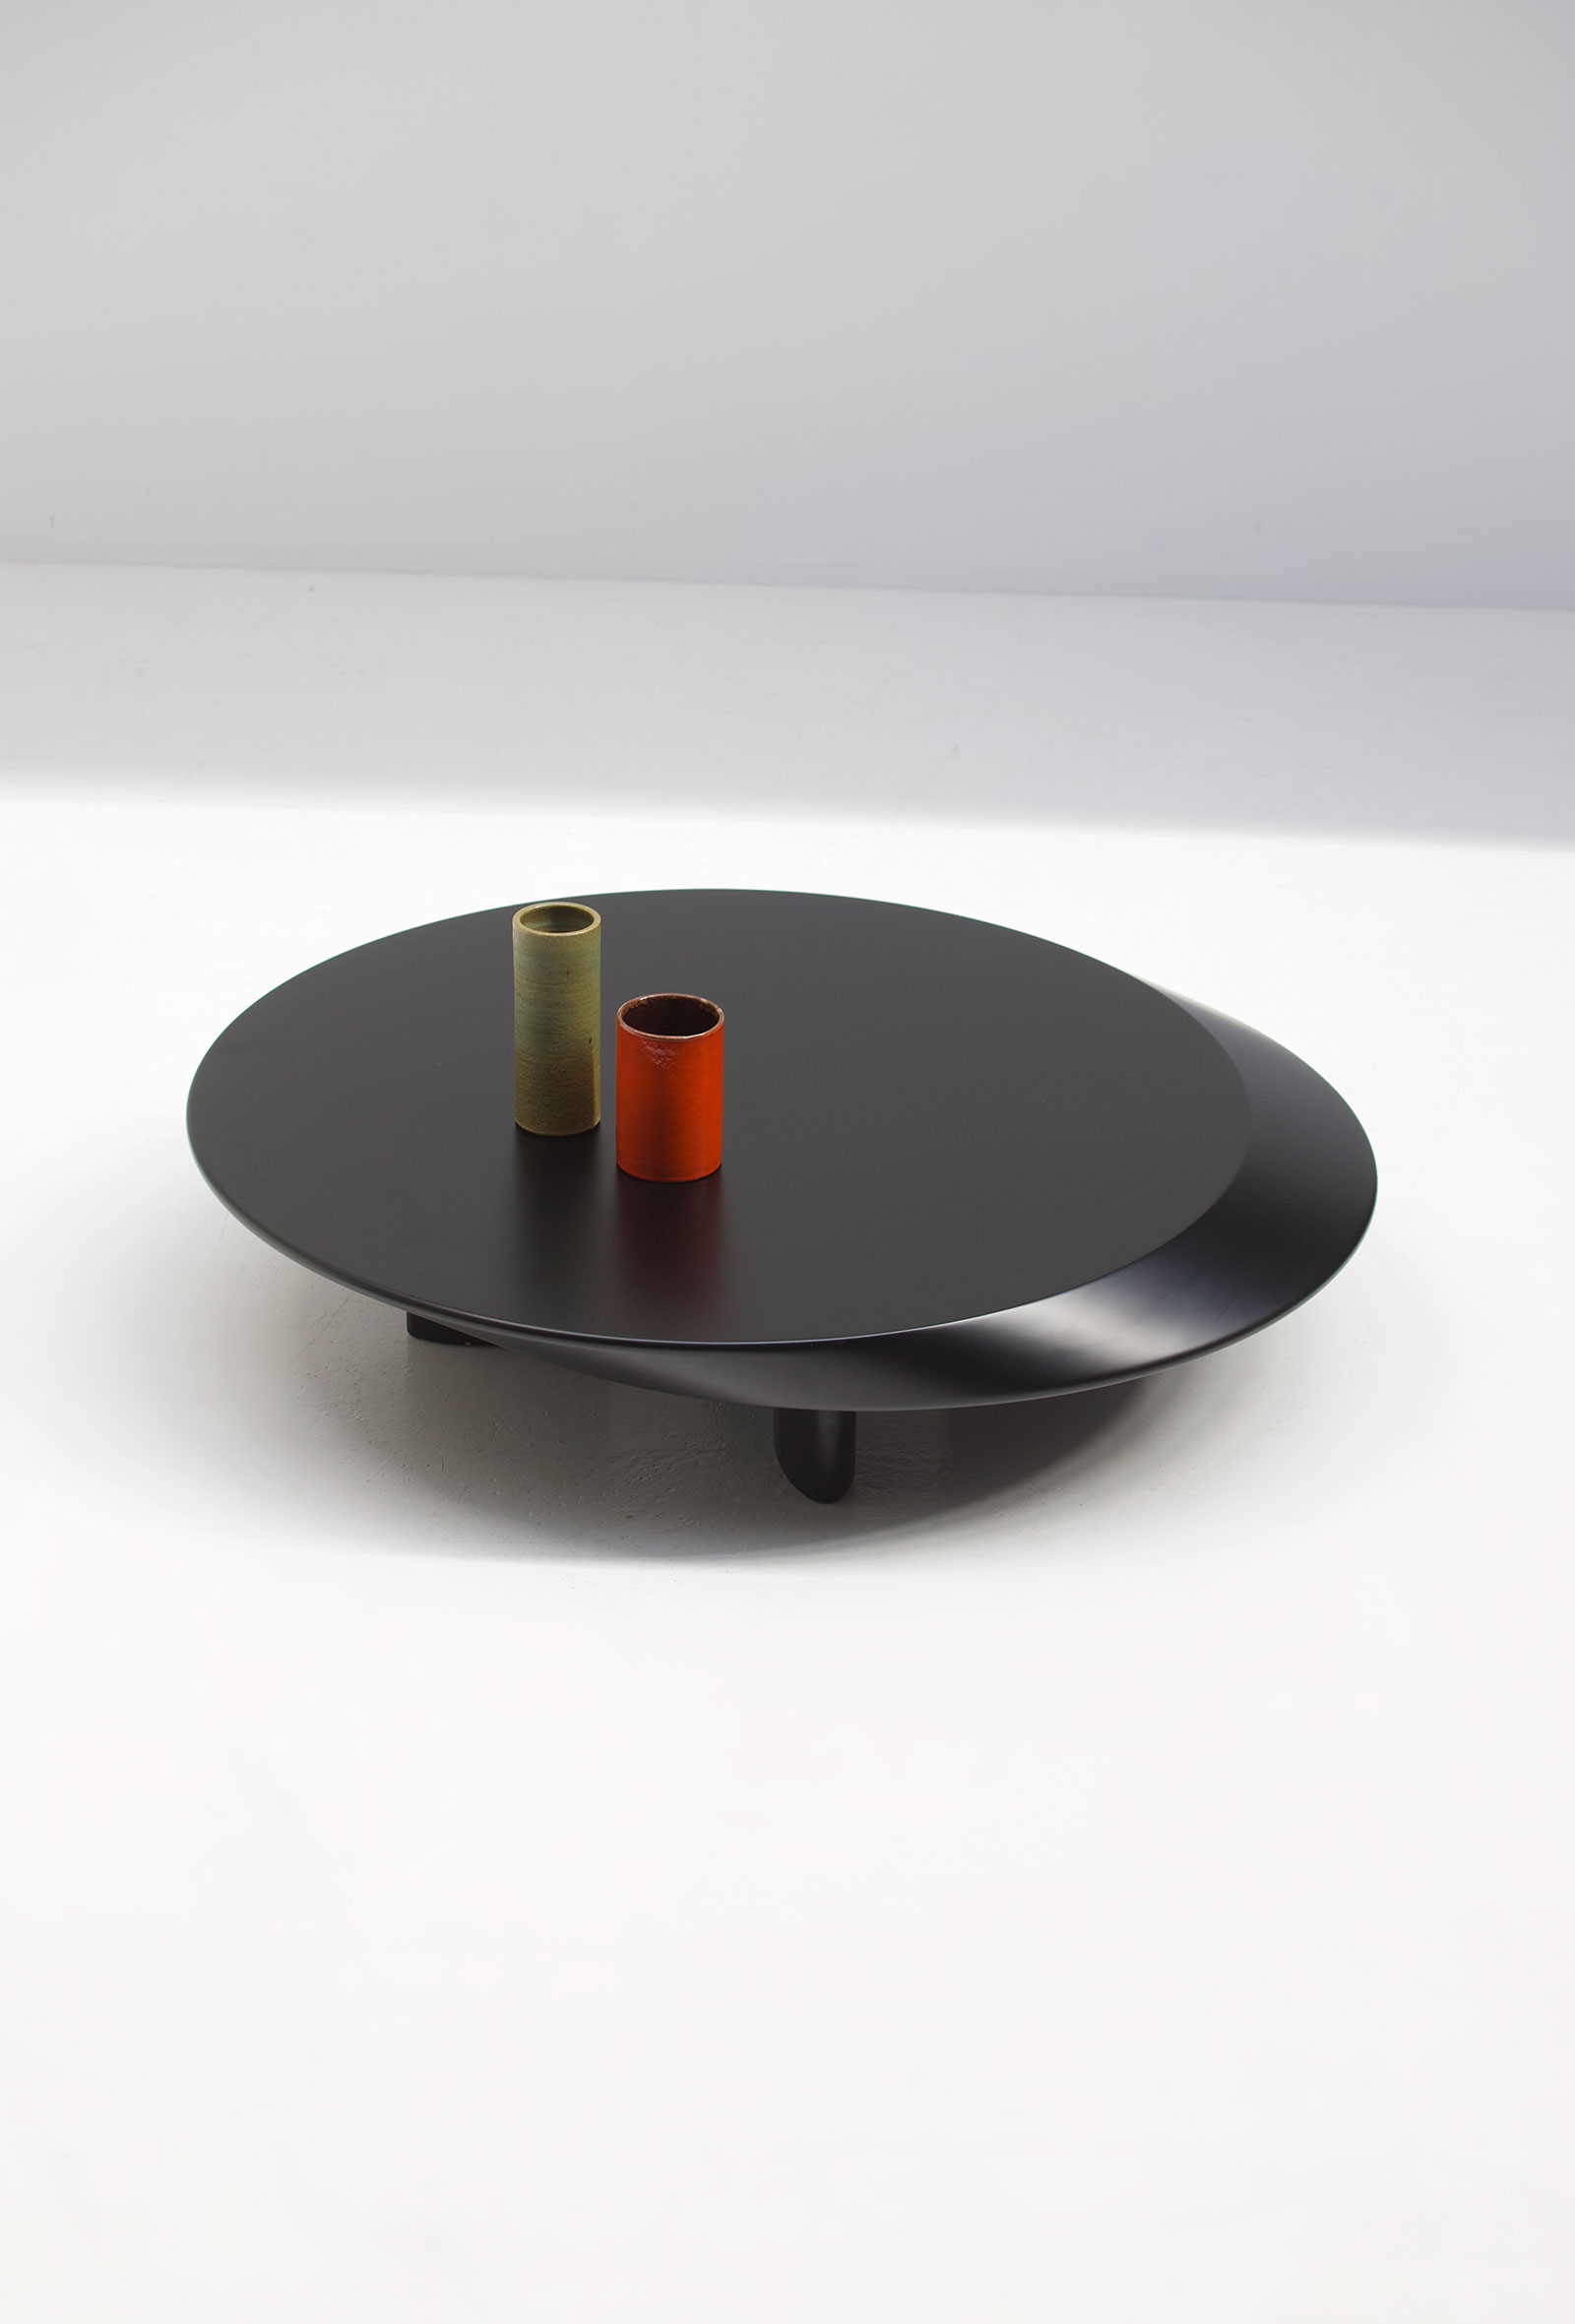 Charlotte Perriand Accordo Coffee Table Cassinaimage 5